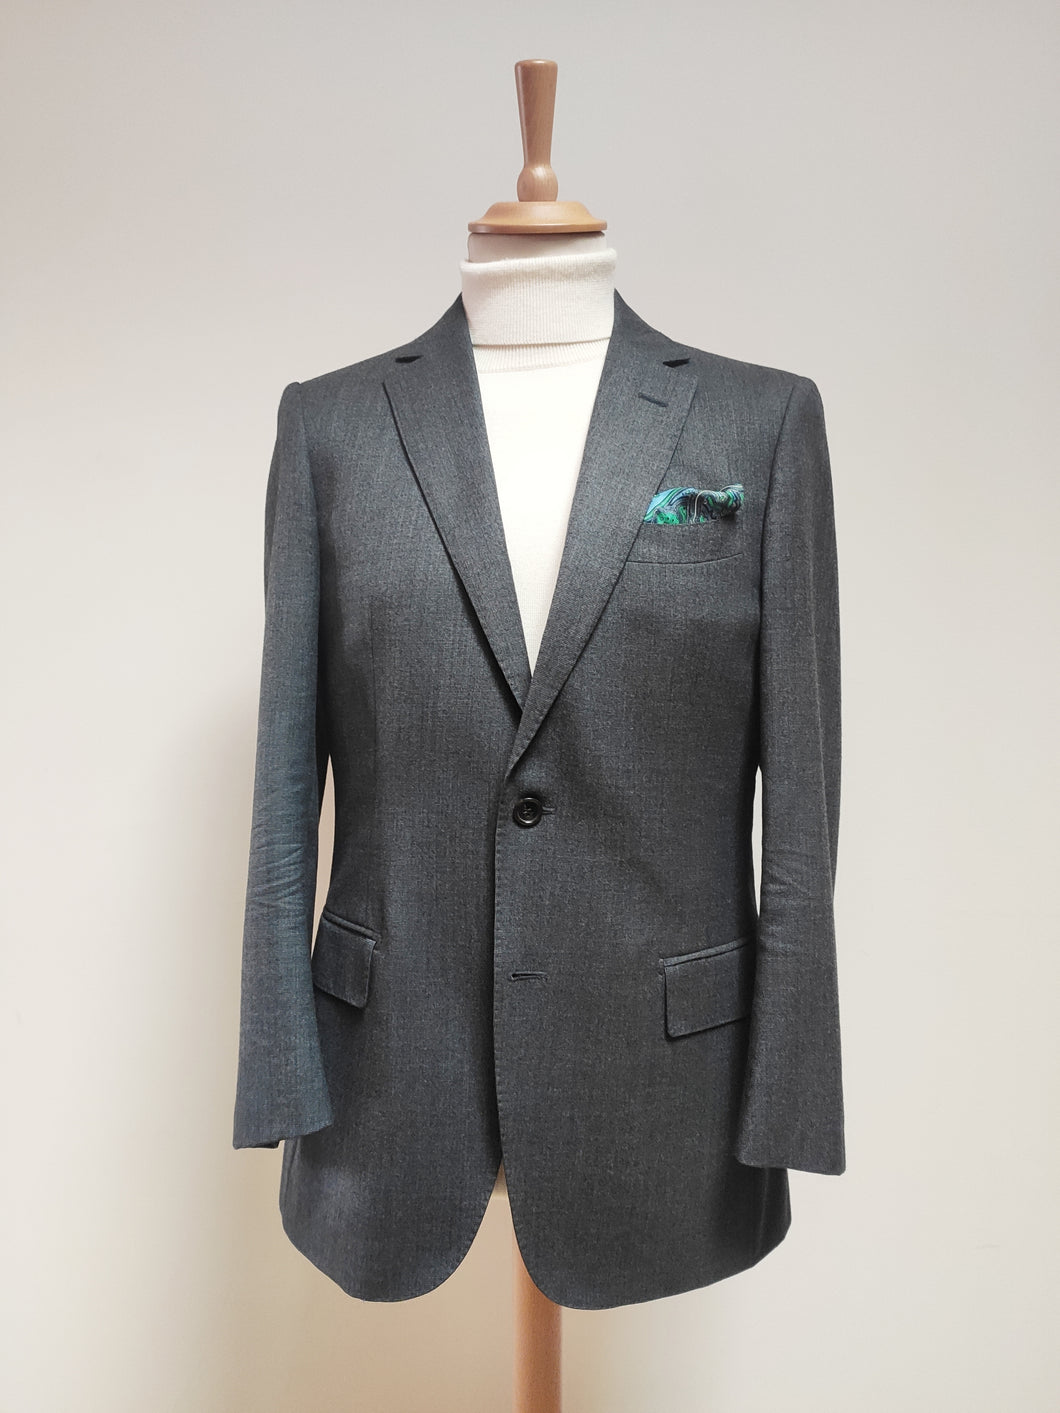 Suitsupply blazer gris pure wool 130's taille 46